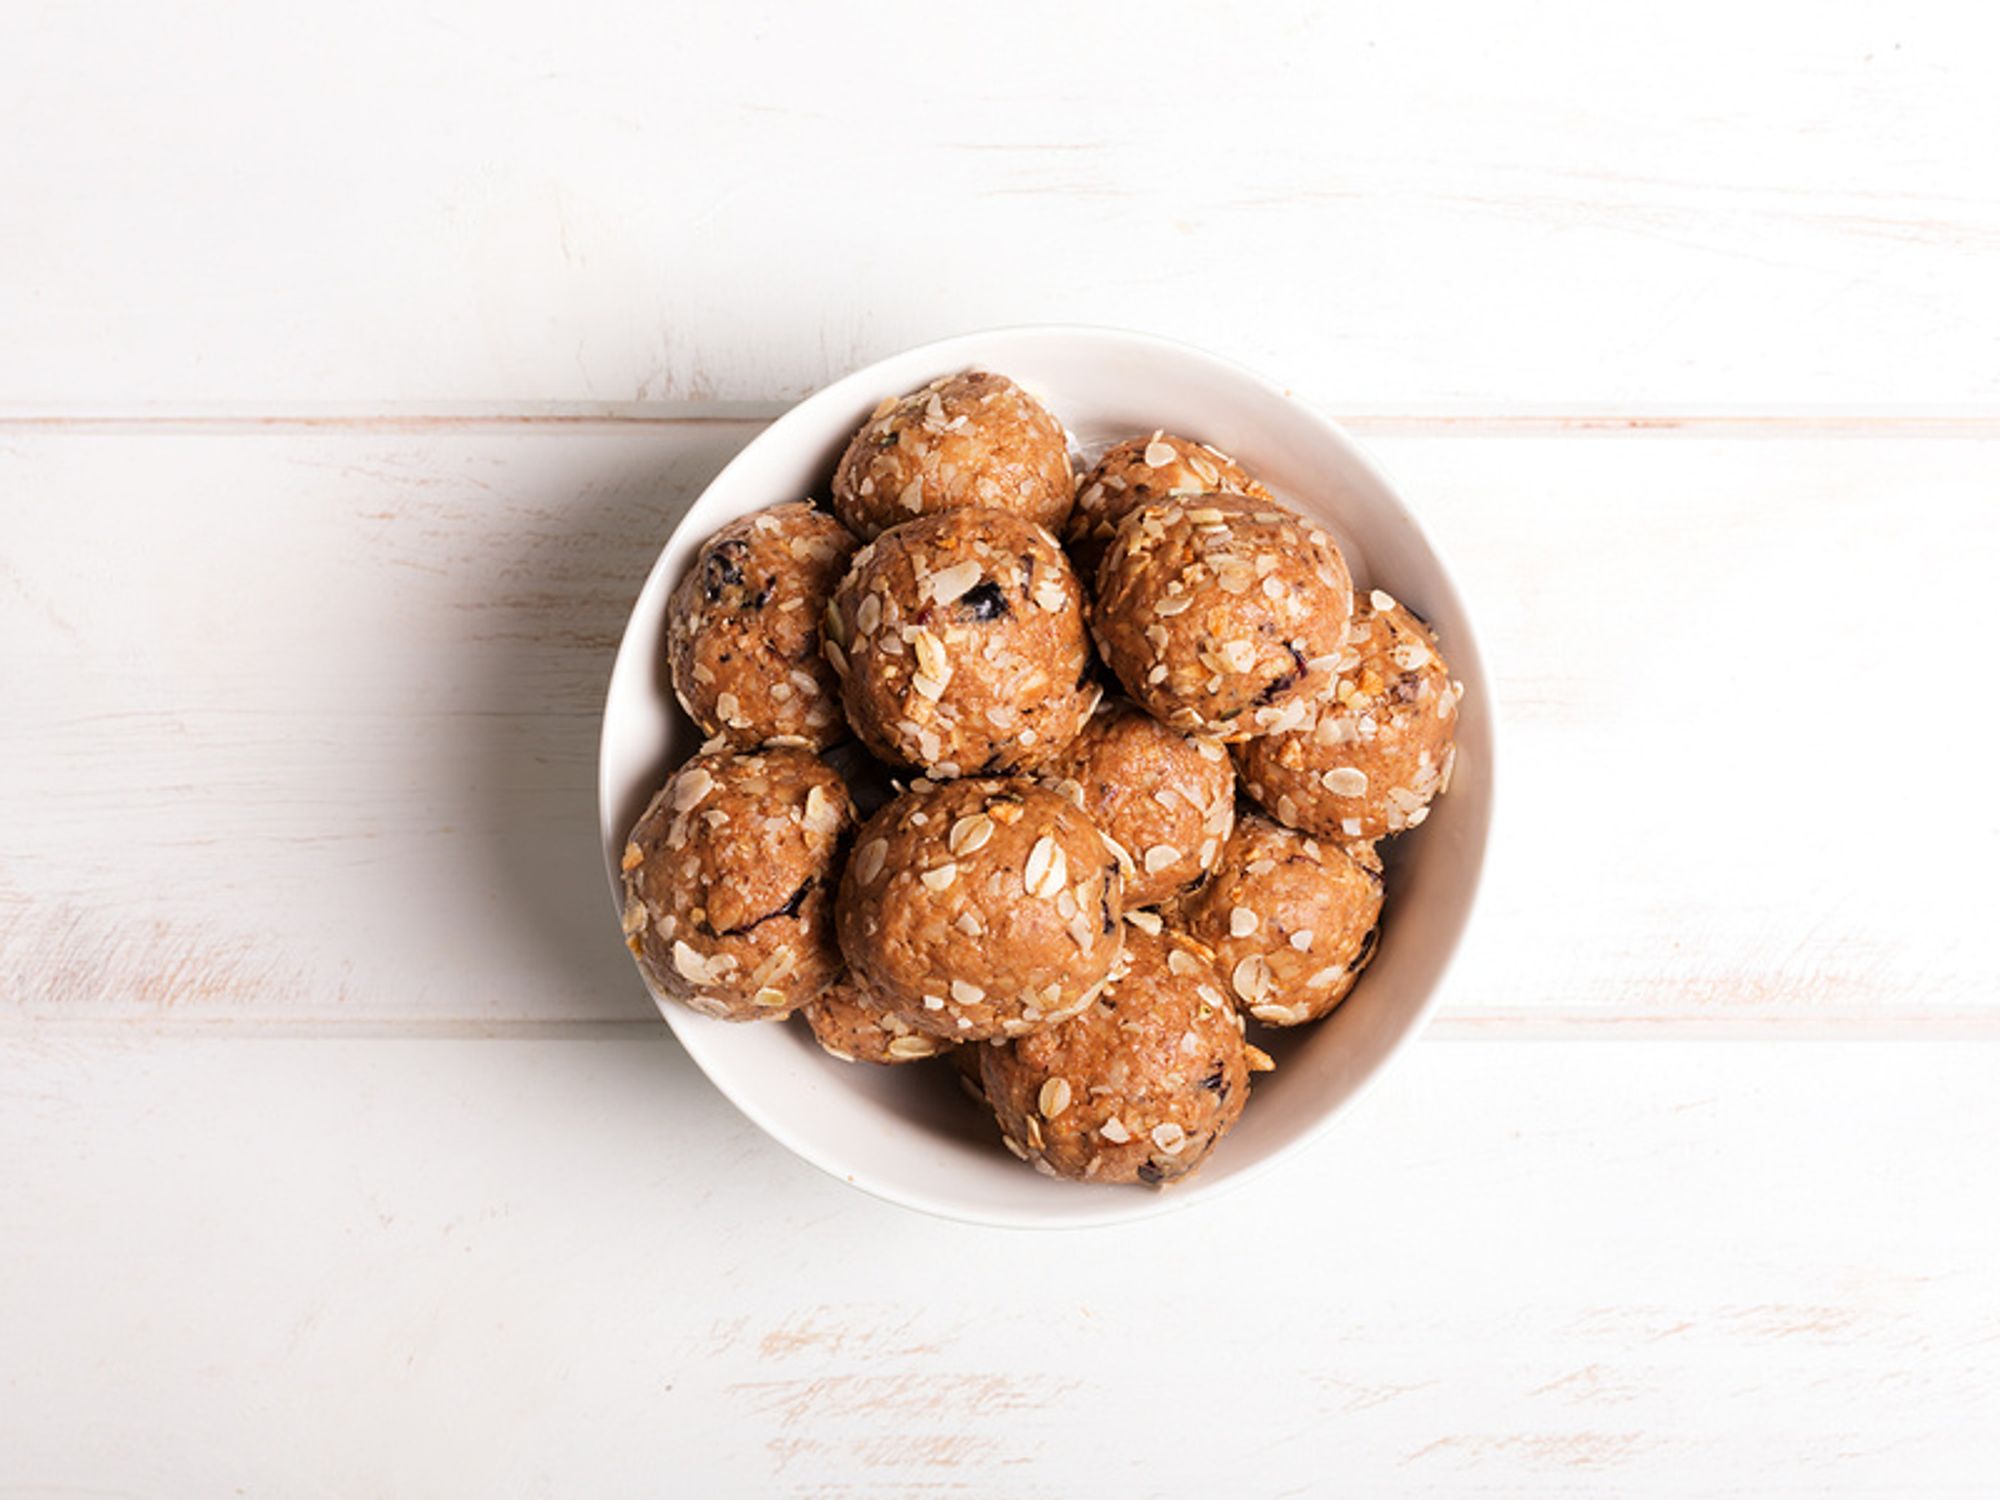 Healthy chocolate chip oat energy bites for work